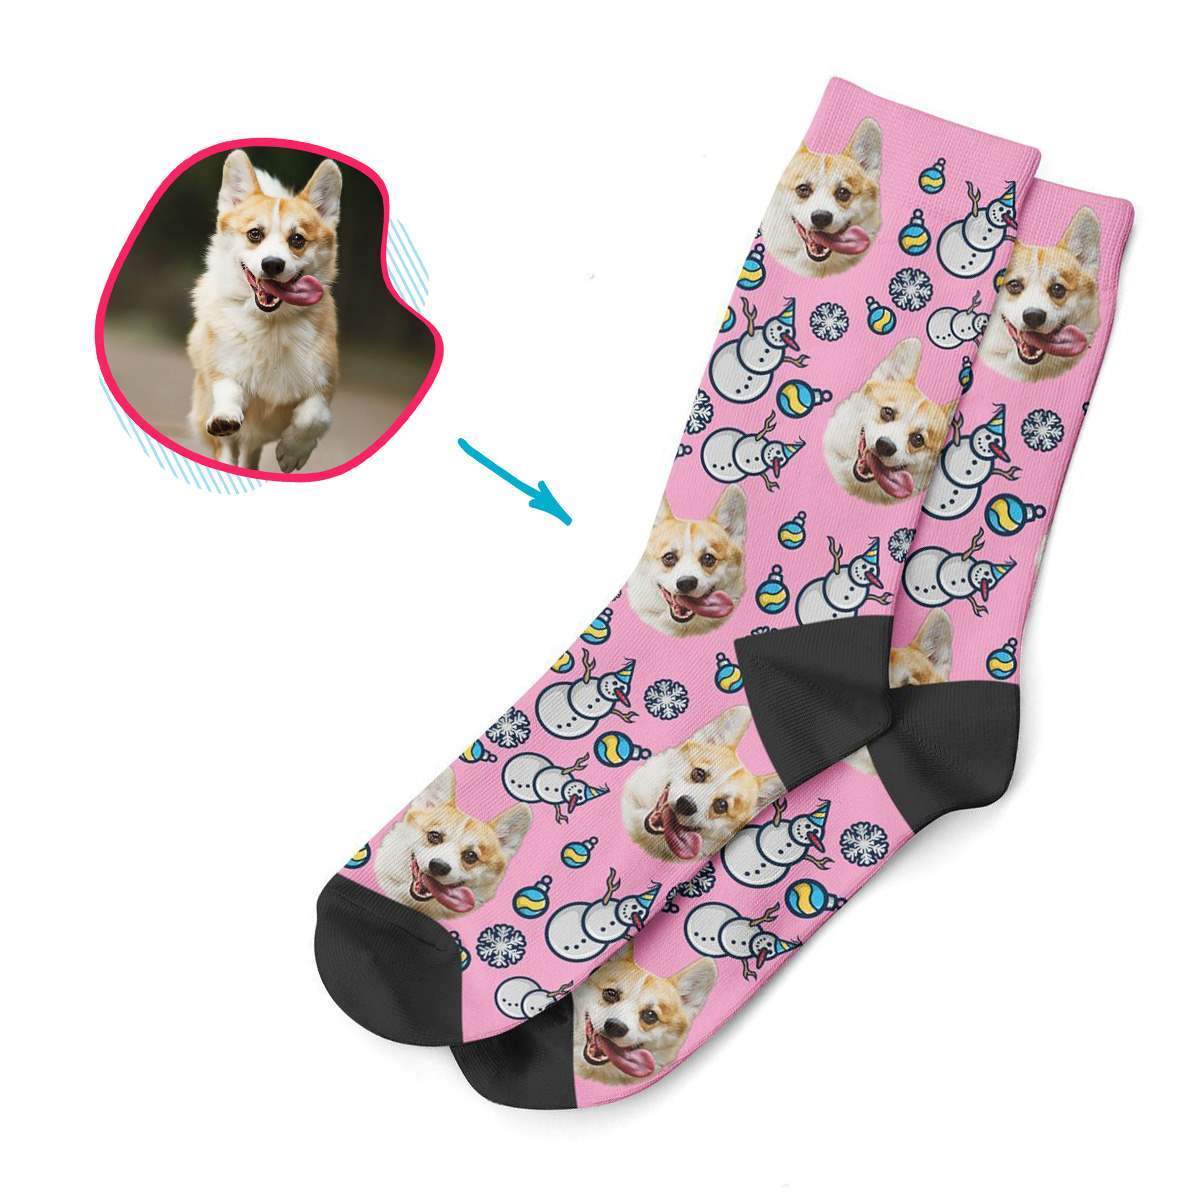 pink Snowman socks personalized with photo of face printed on them